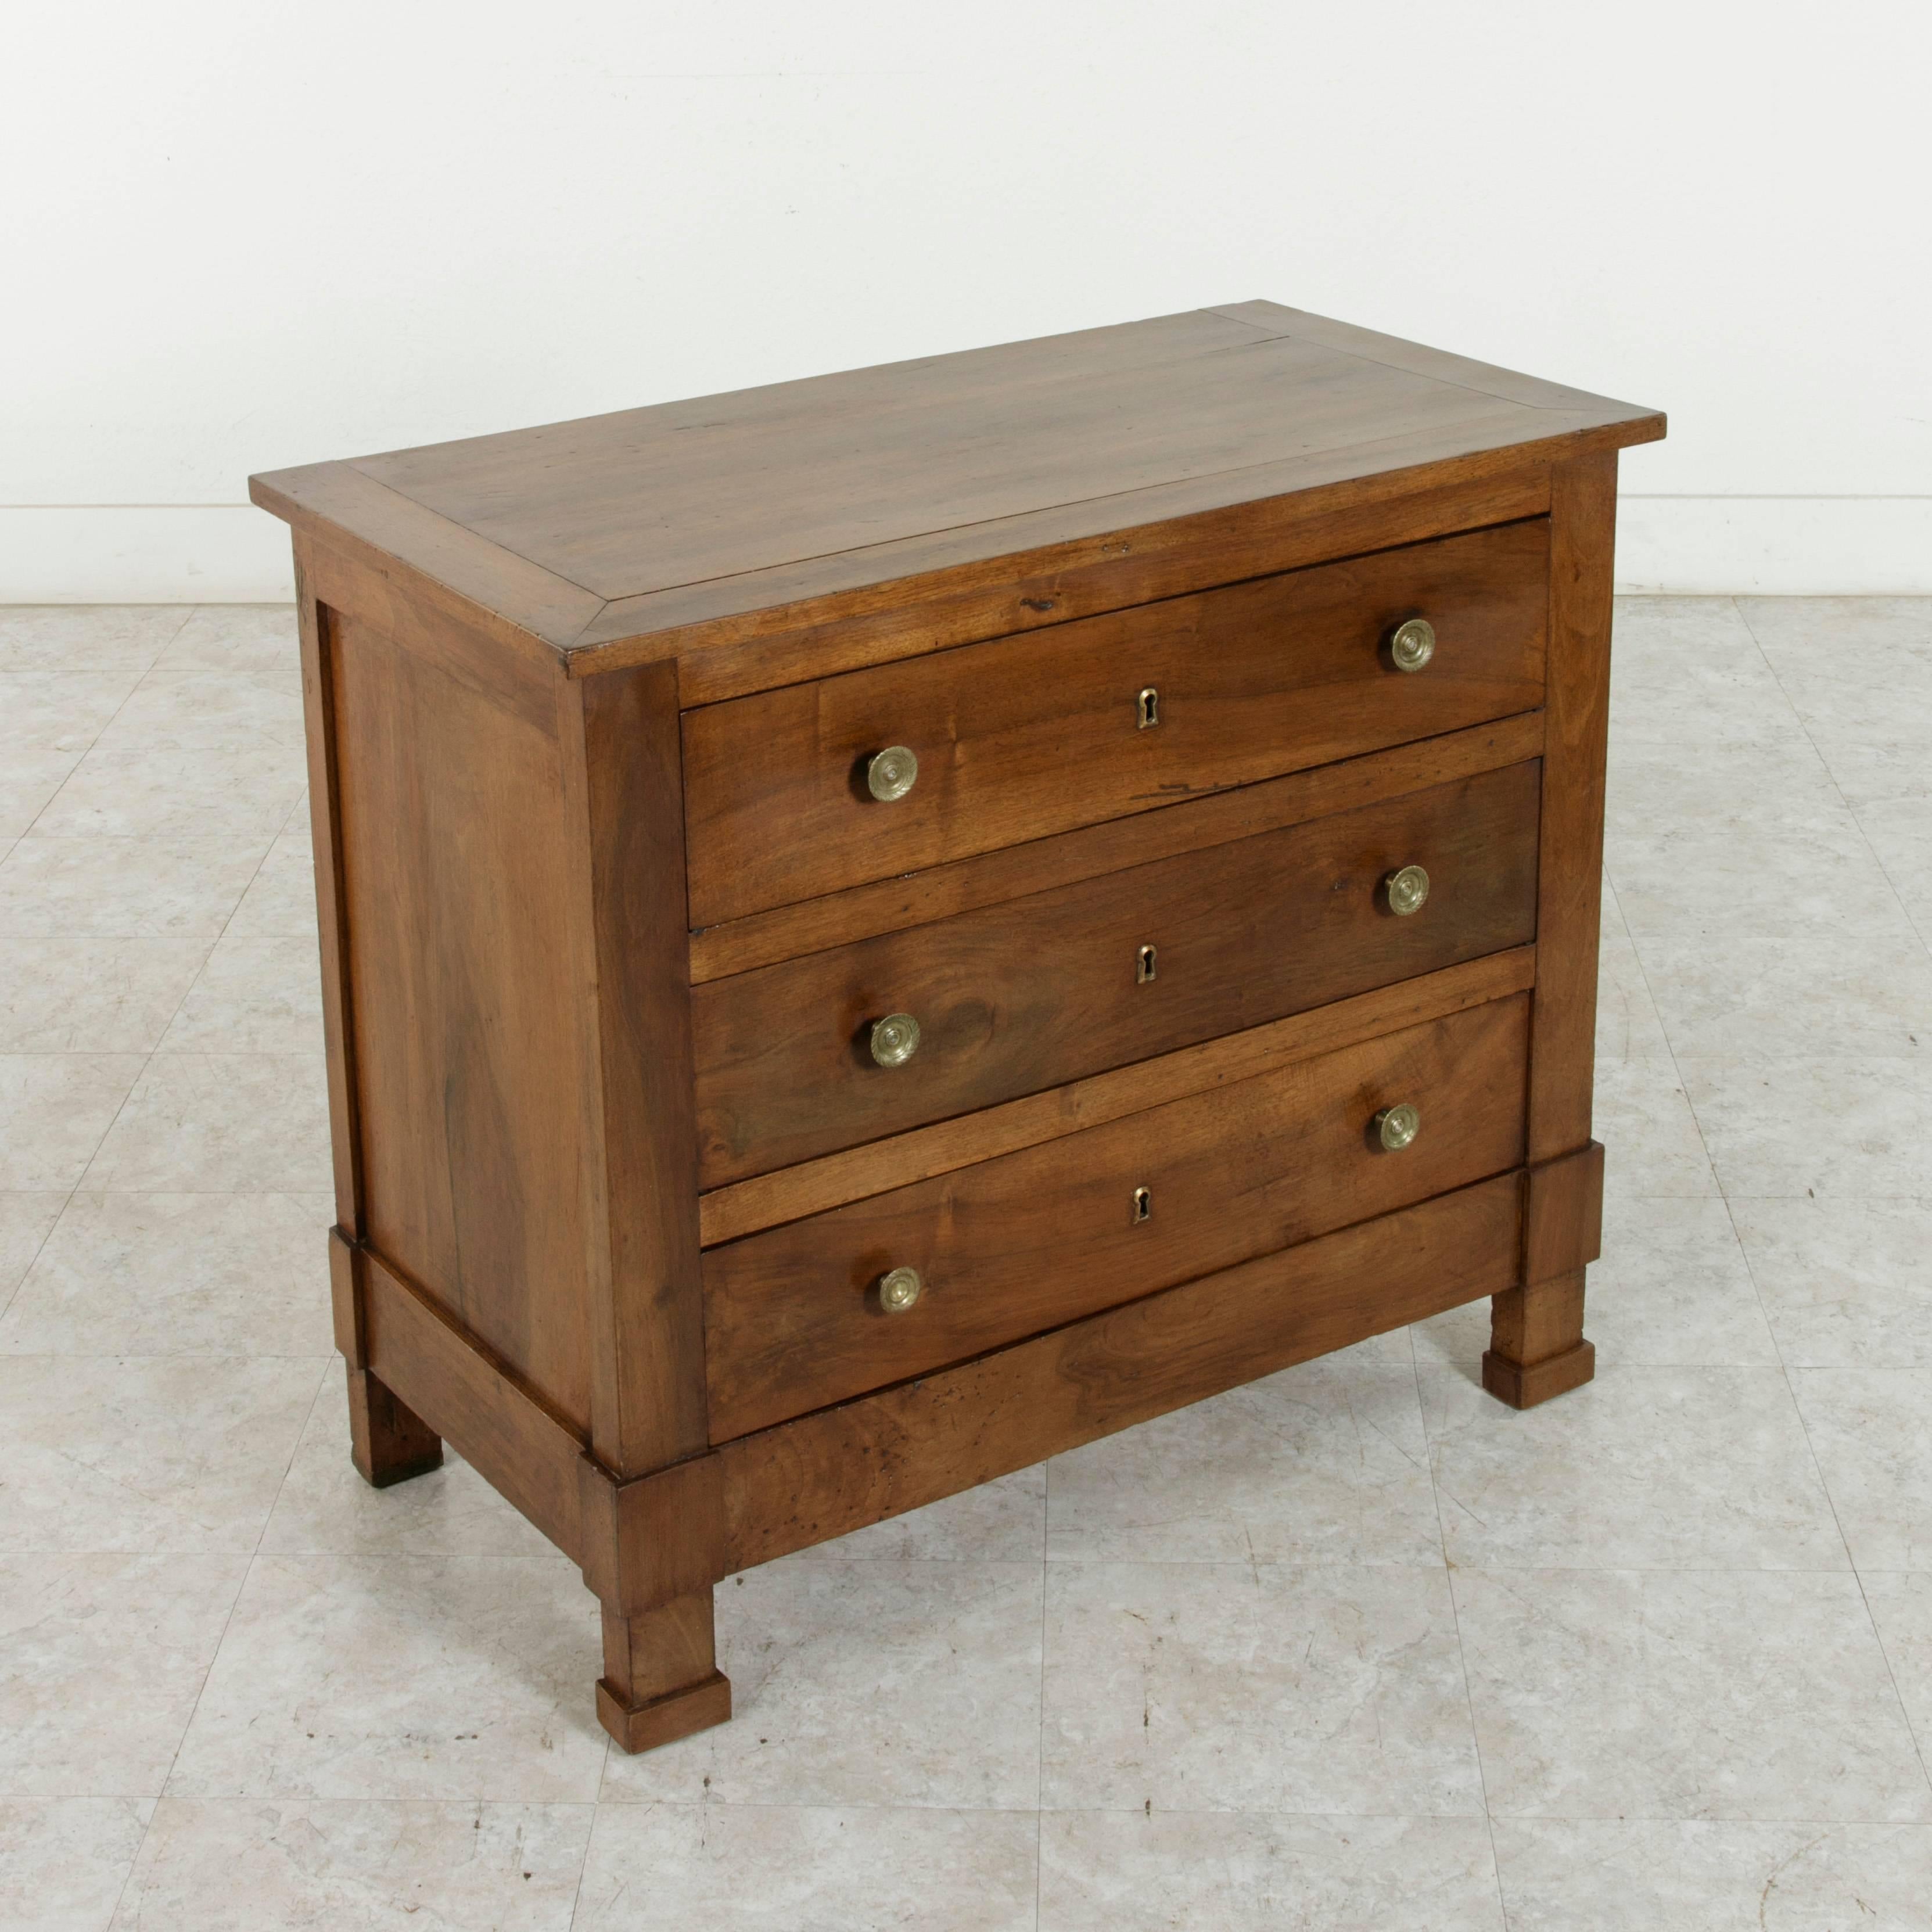 This late 19th century French walnut Empire style commode or chest features solid panel sides and clean, simple lines. The three drawers of dovetail construction are fitted with bronze drawer pulls and key entries. Unique for its size, this handsome